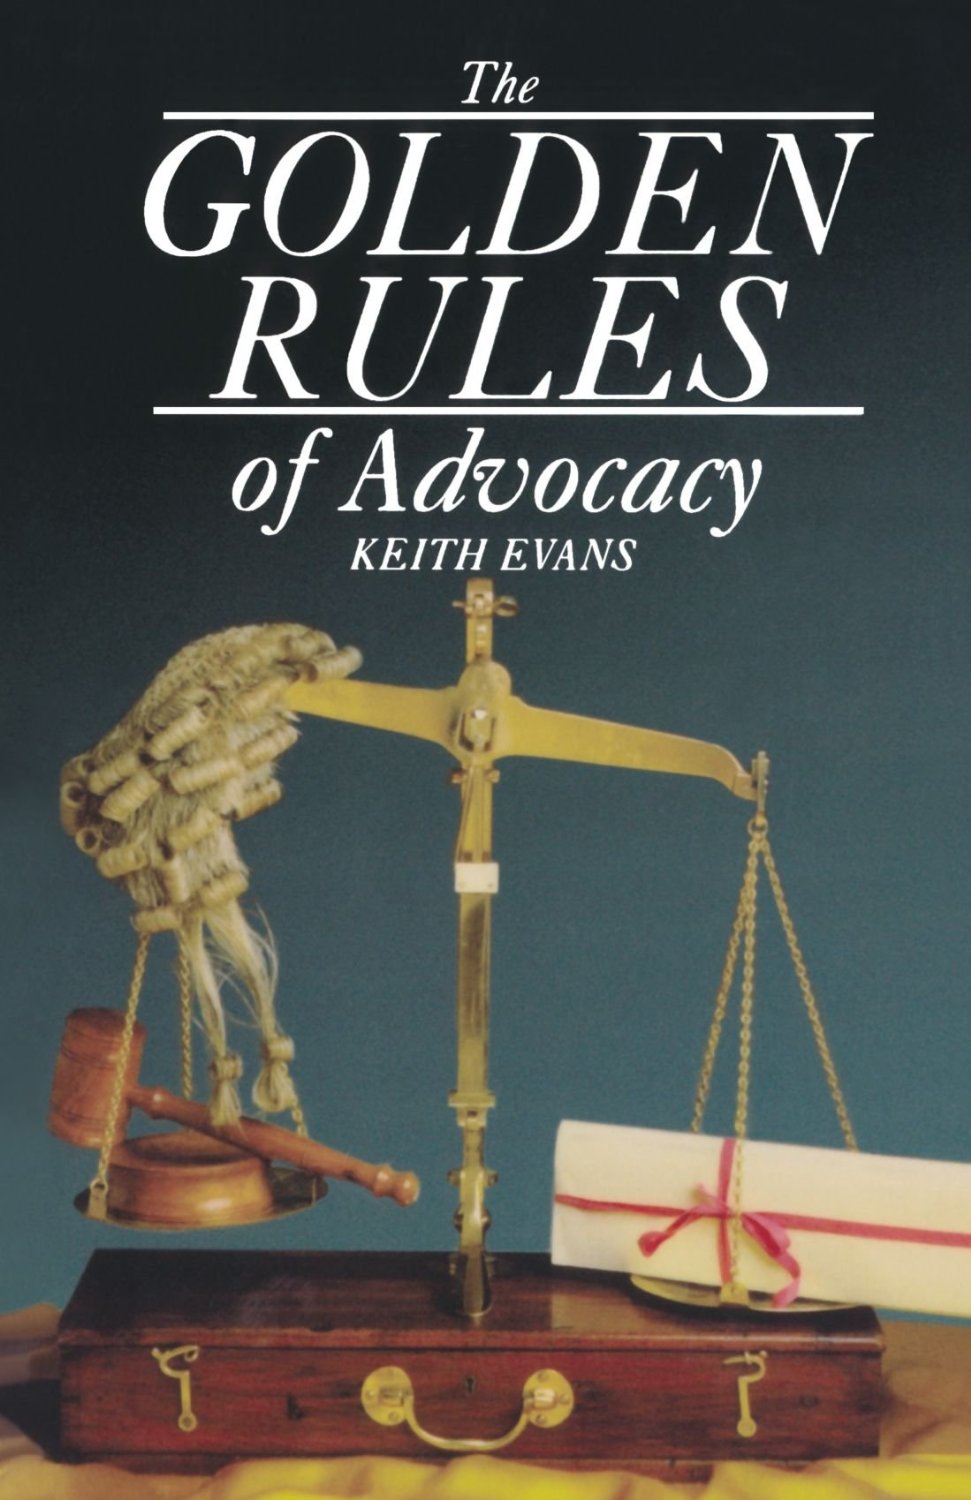 THE GOLDEN RULES OF ADVOCACY